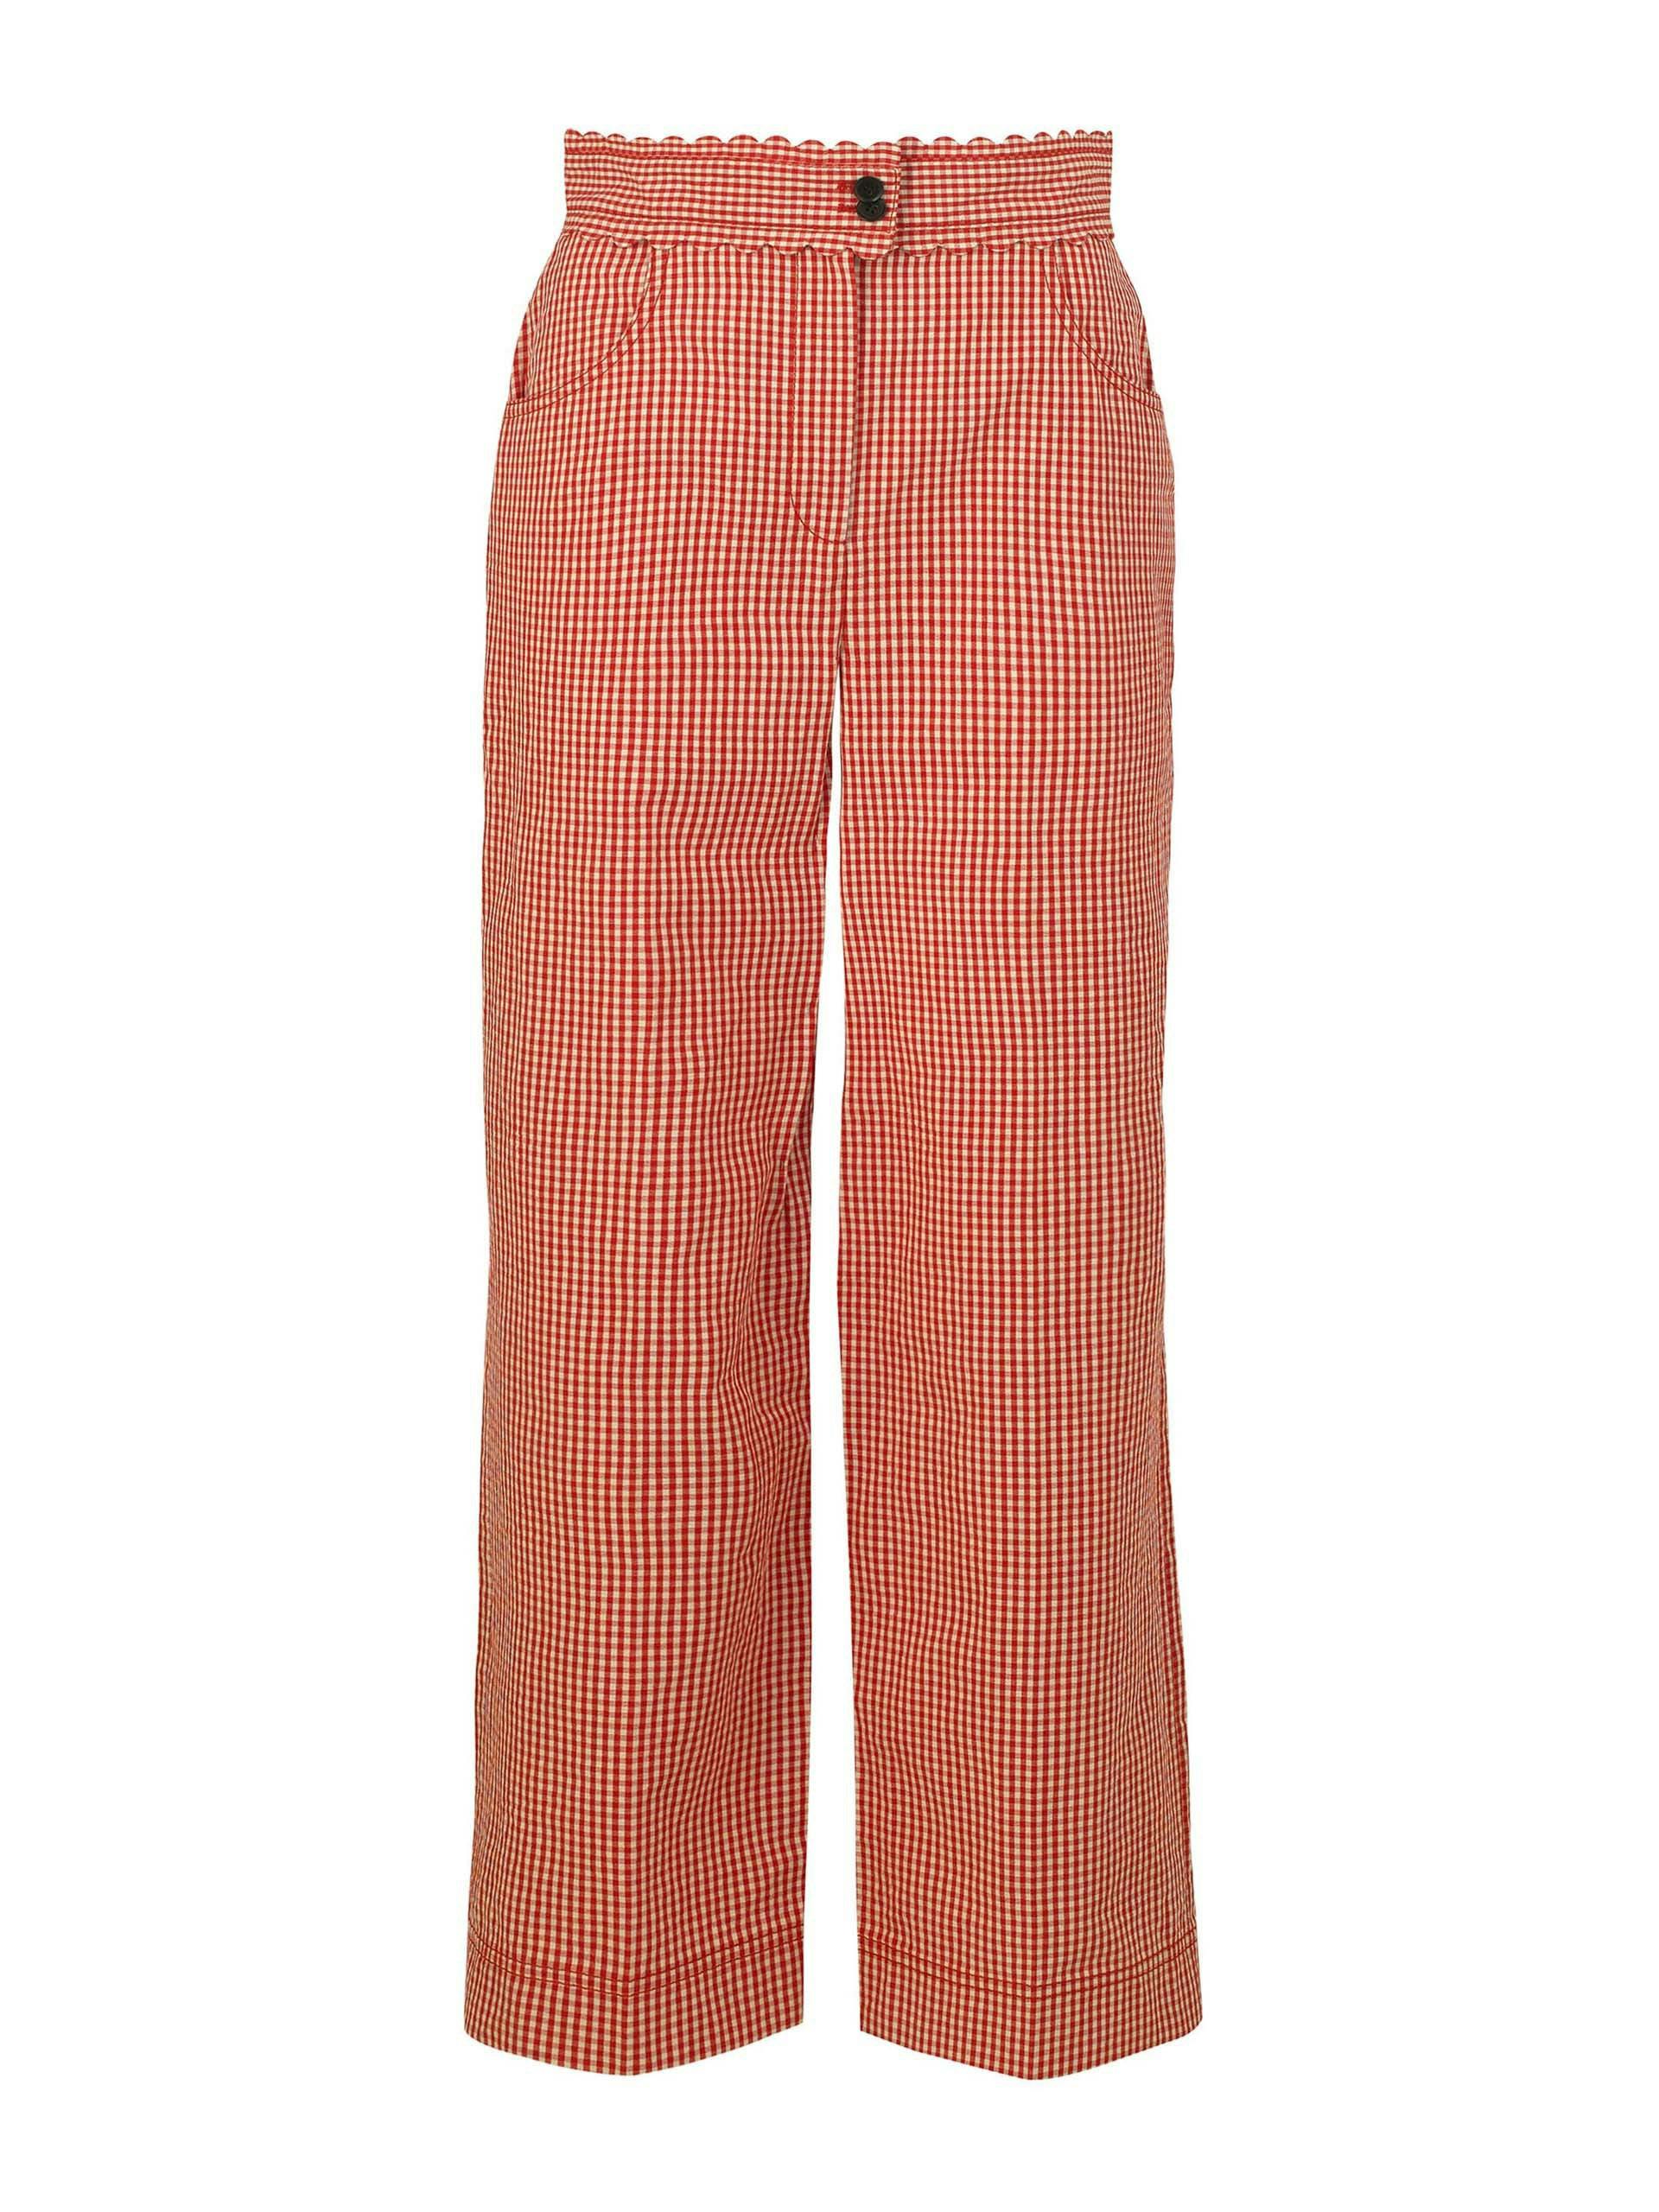 Red and white scalloped gingham cropped trousers